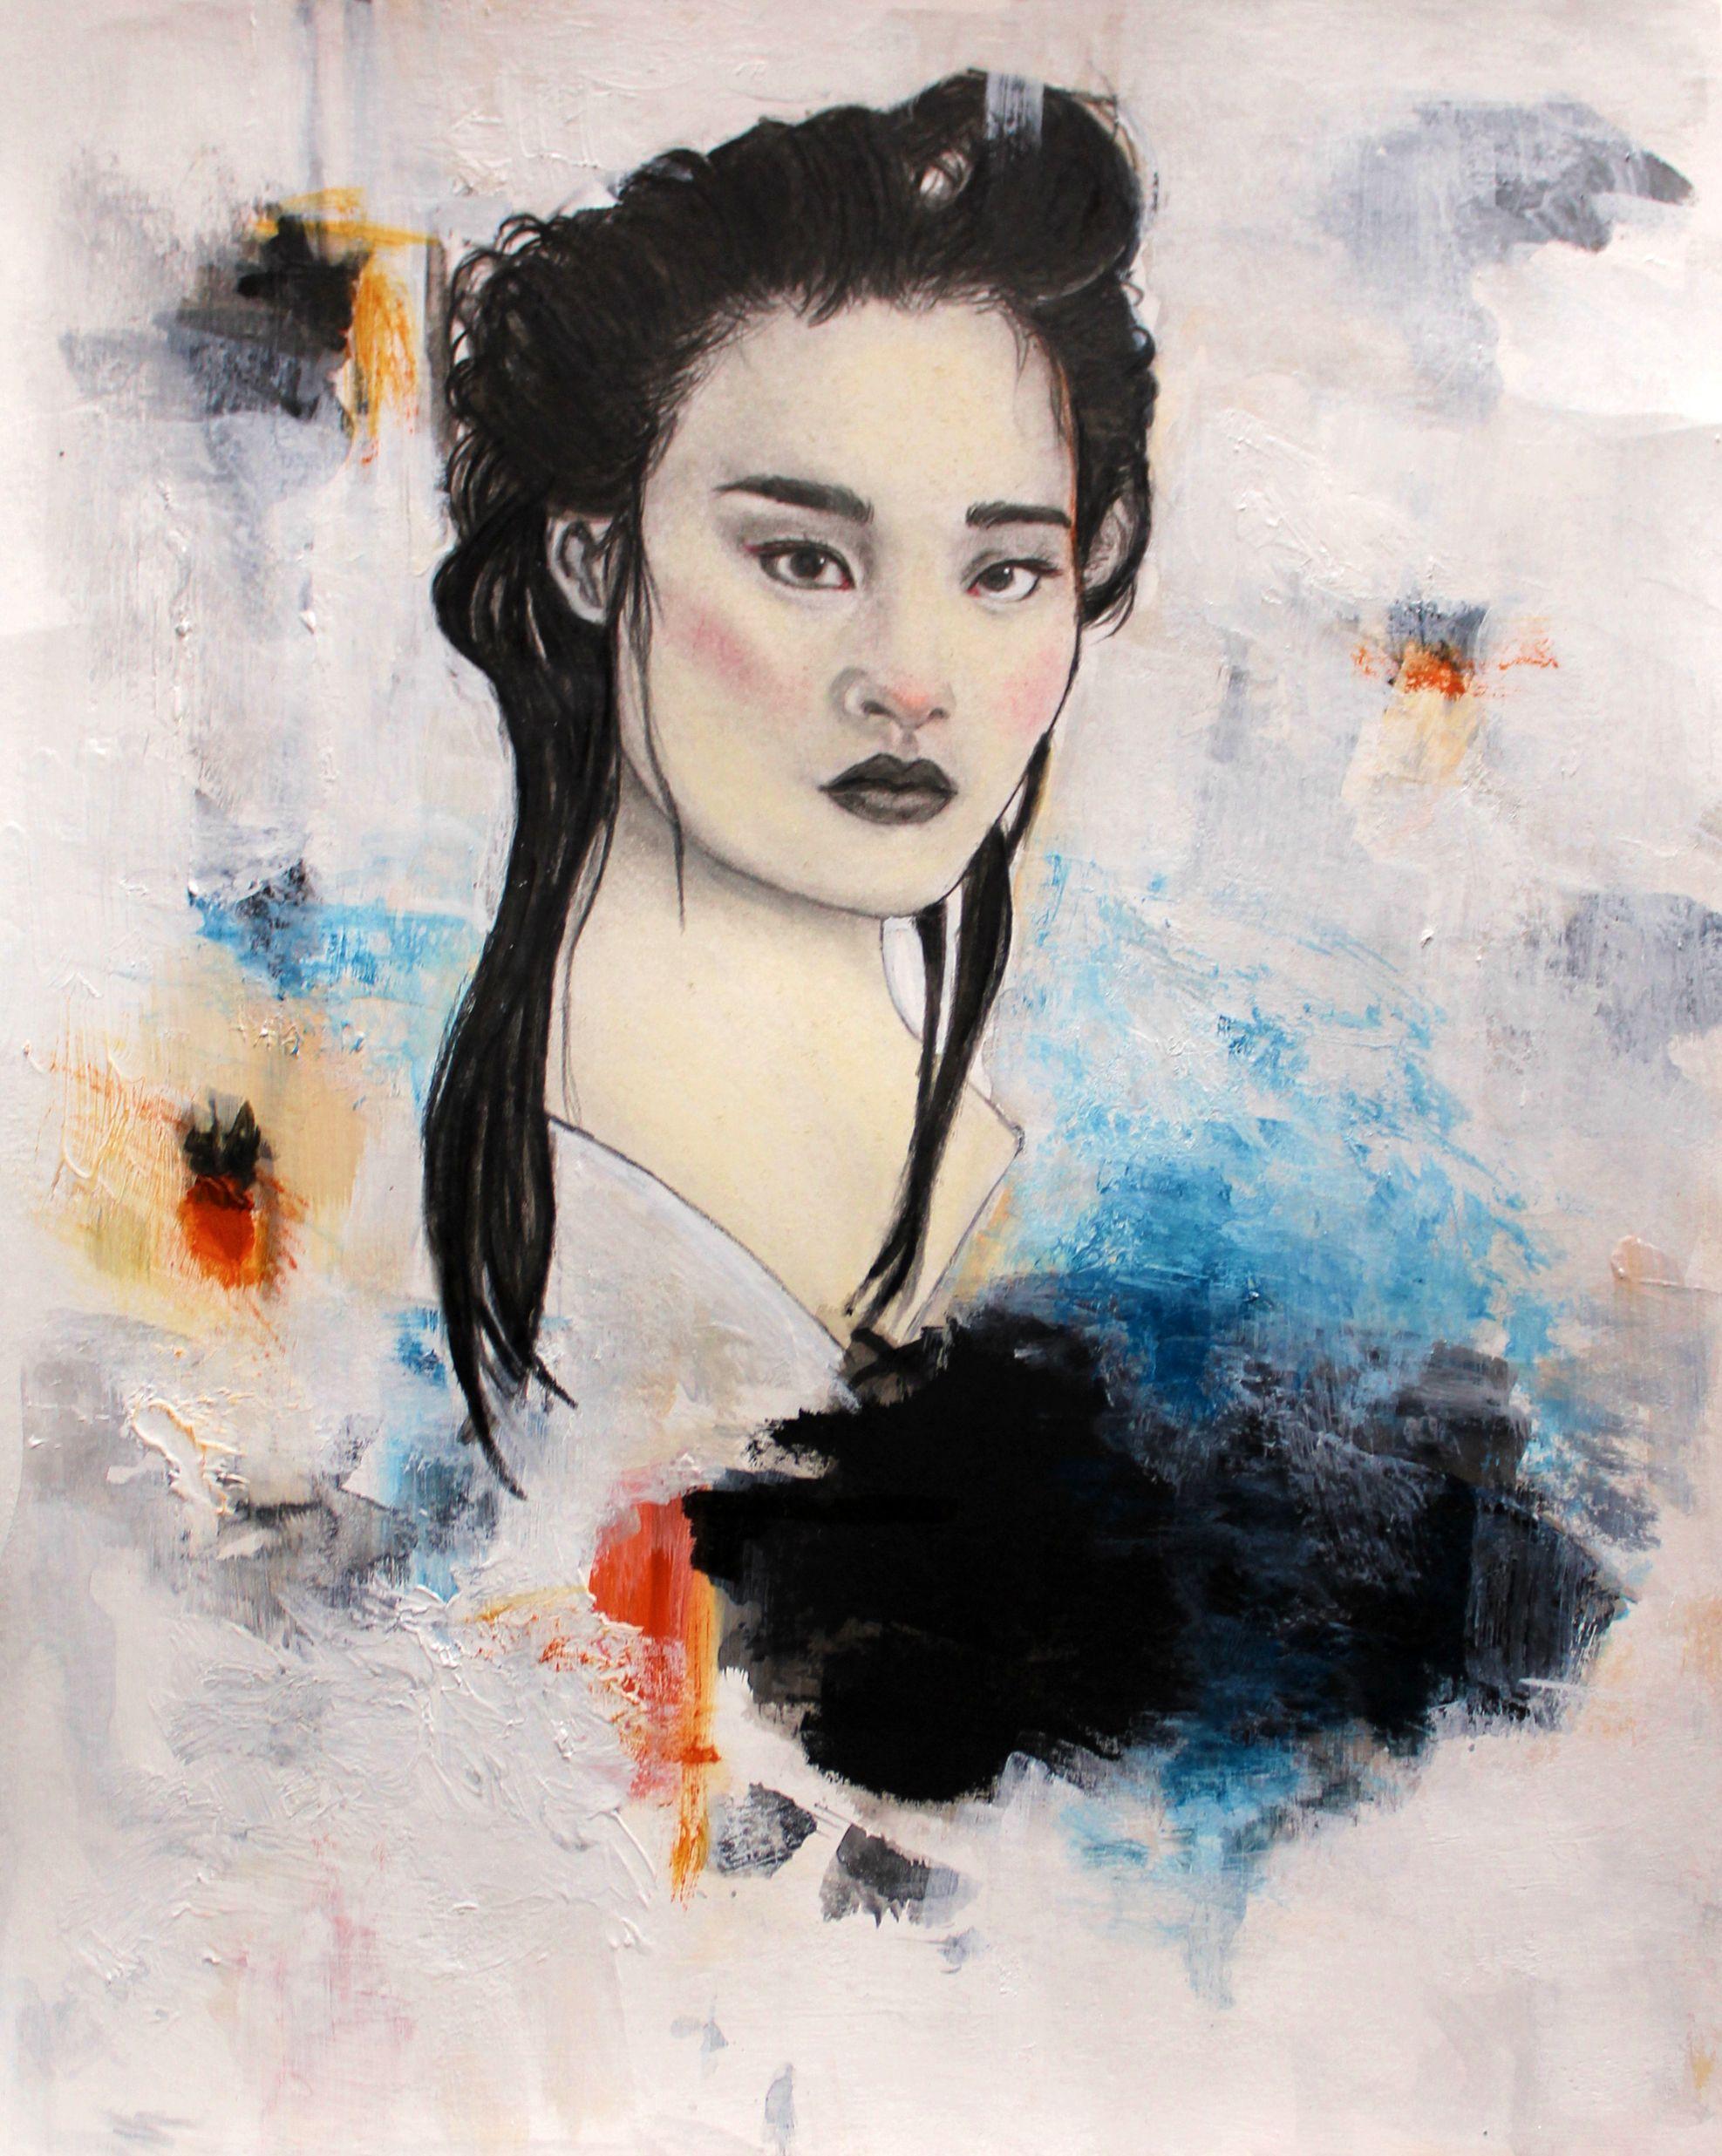 Her No.024, Mixed Media on Paper - Mixed Media Art by Haydee Torres